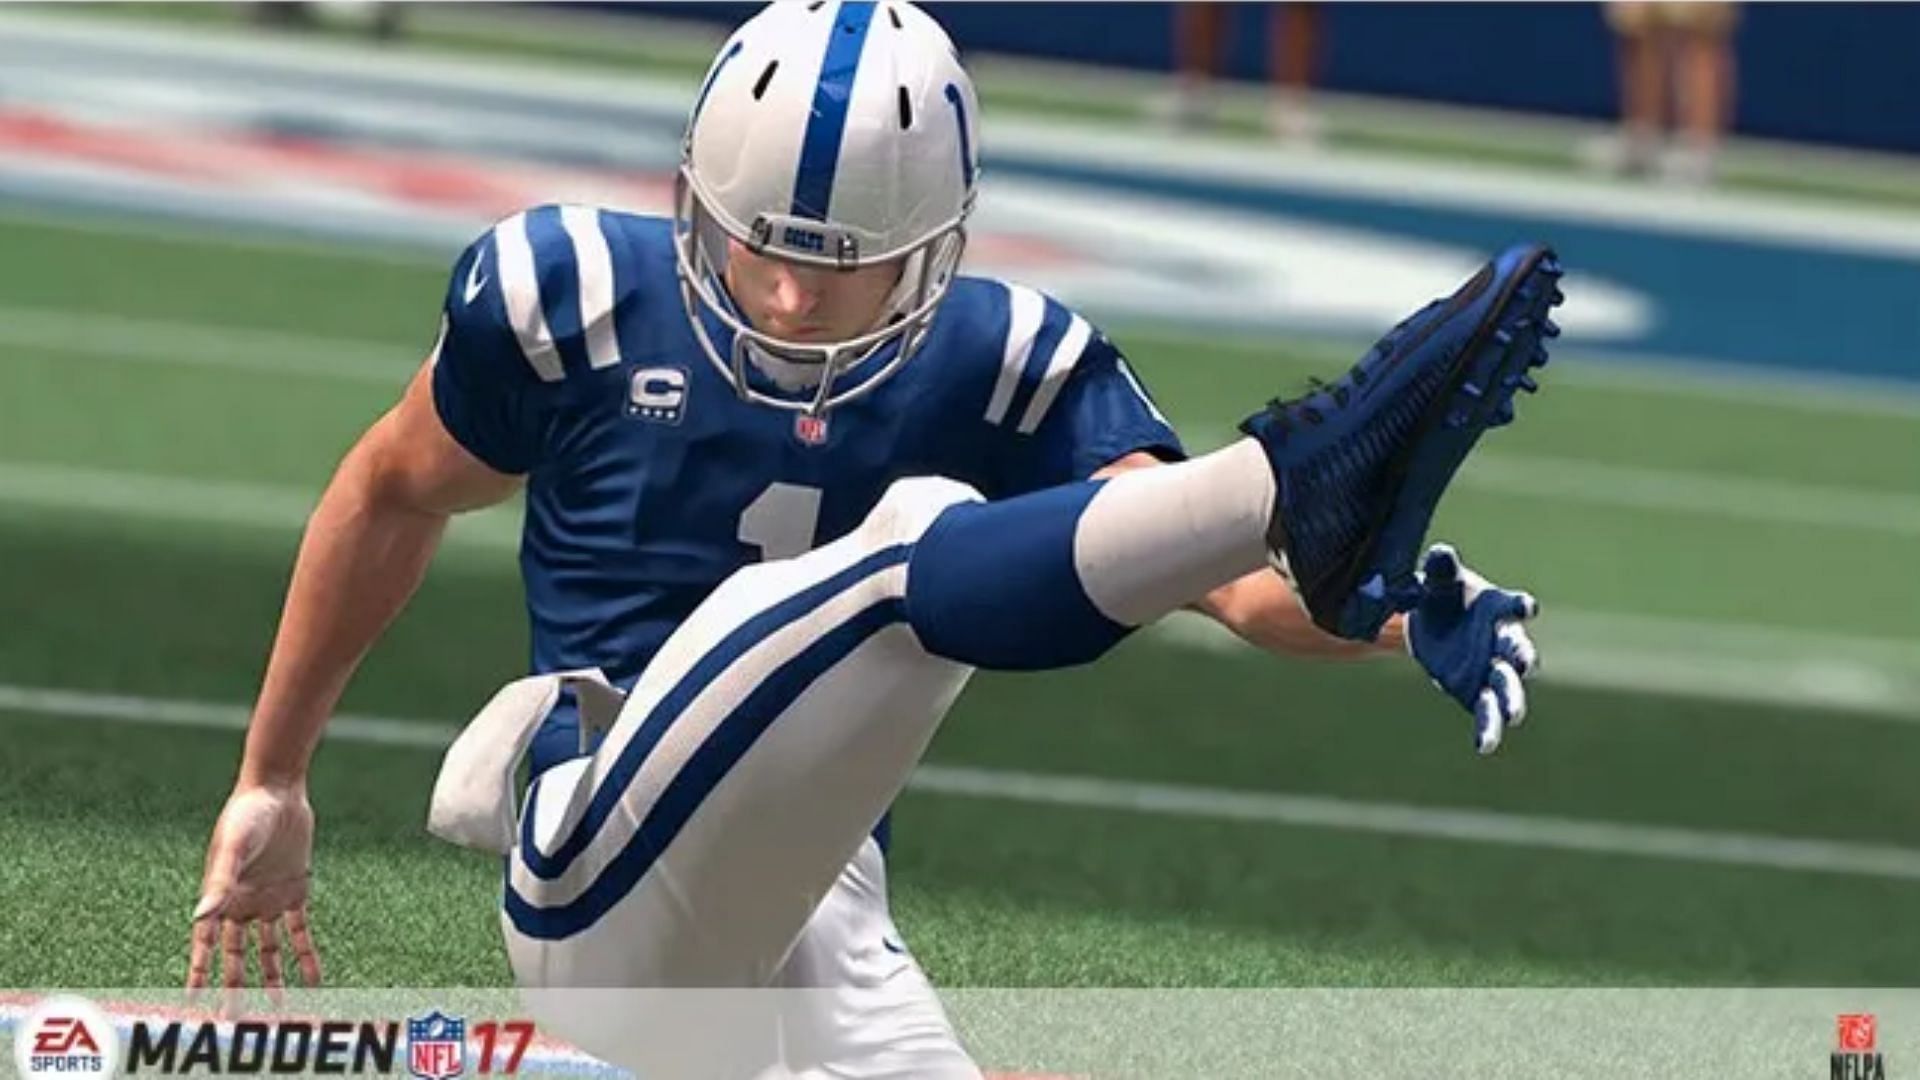 What is Pat Mcafee's rating in Madden?